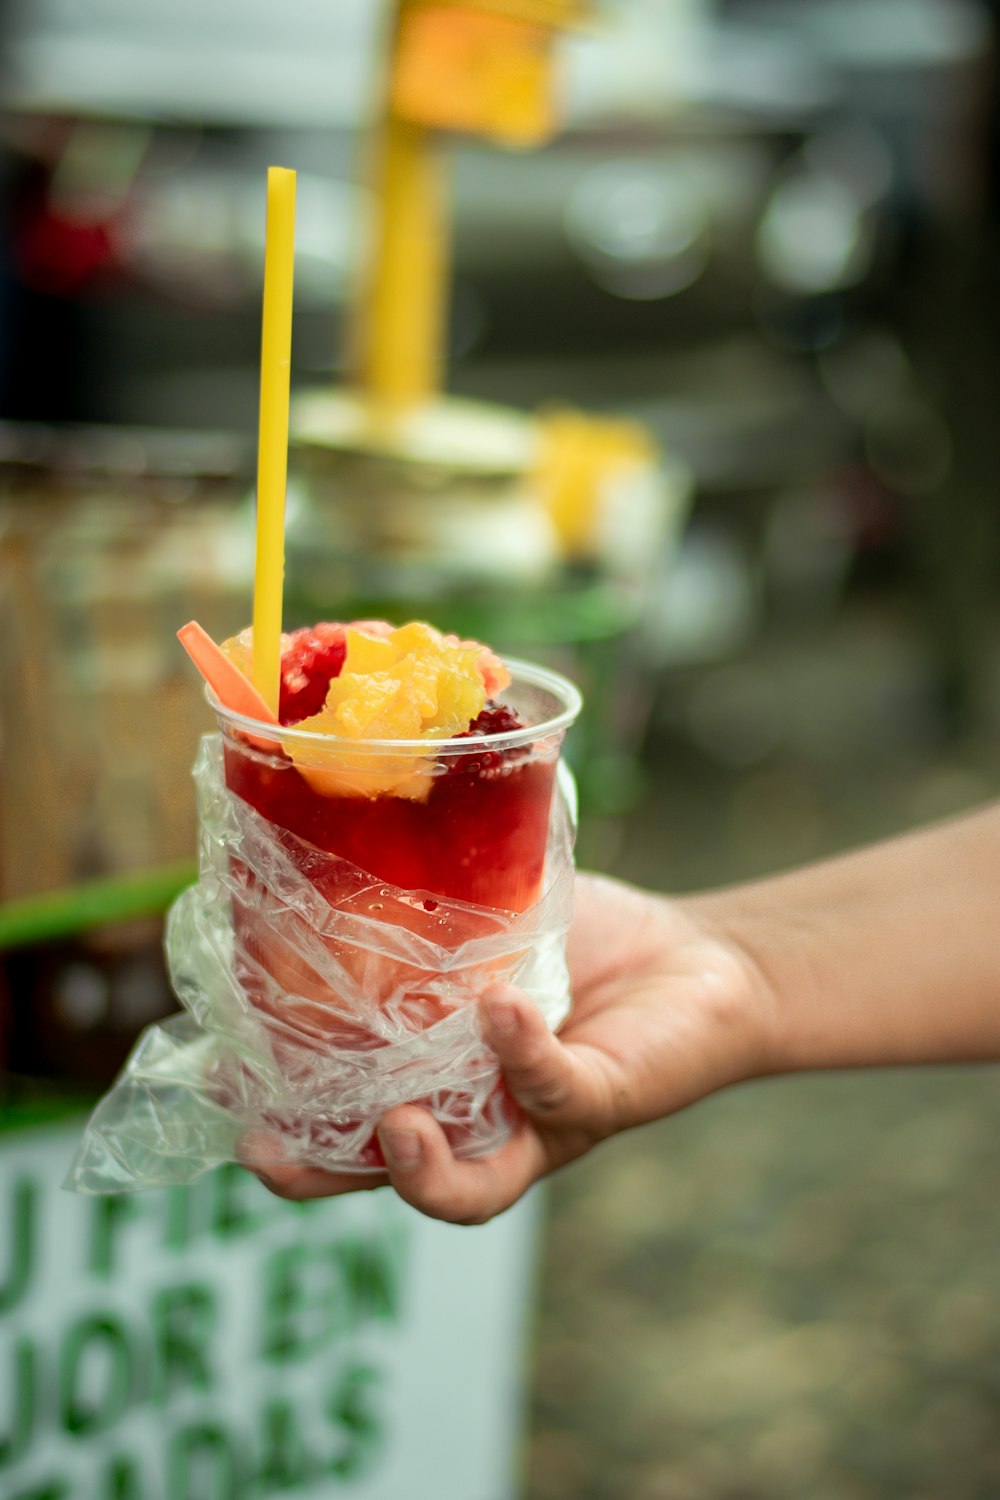 a person holding a plastic cup filled with fruit